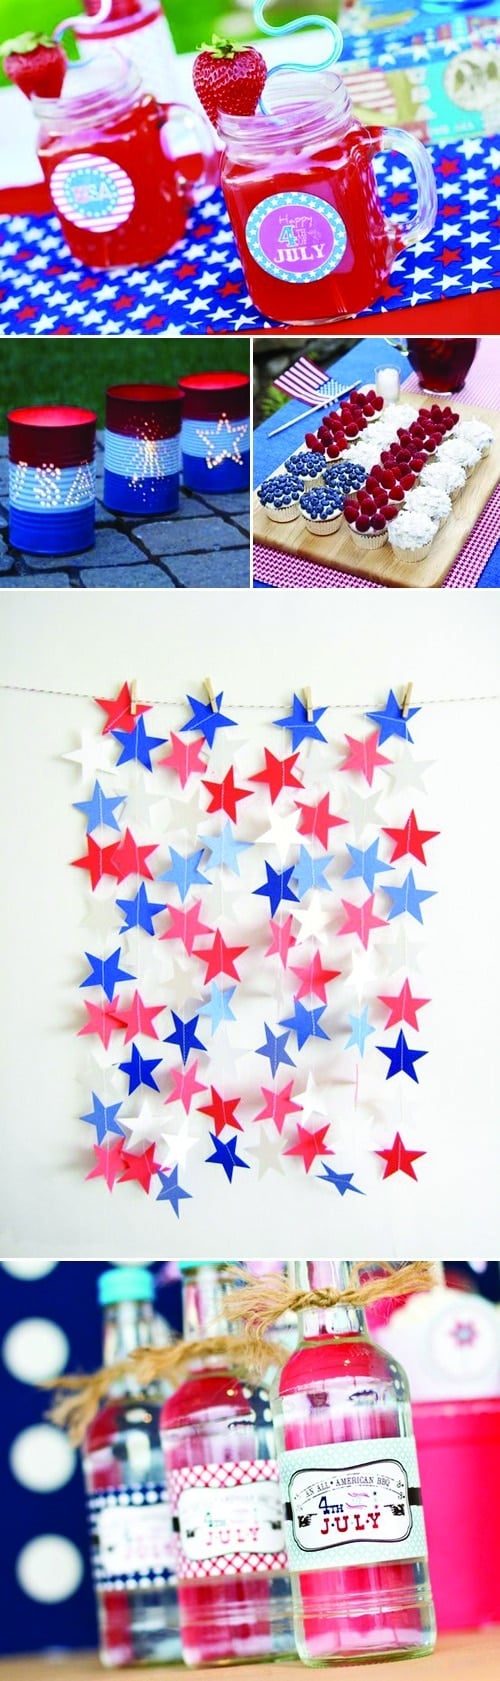 Fourth of July Patriotic Inspiration Board, Red White and Blue